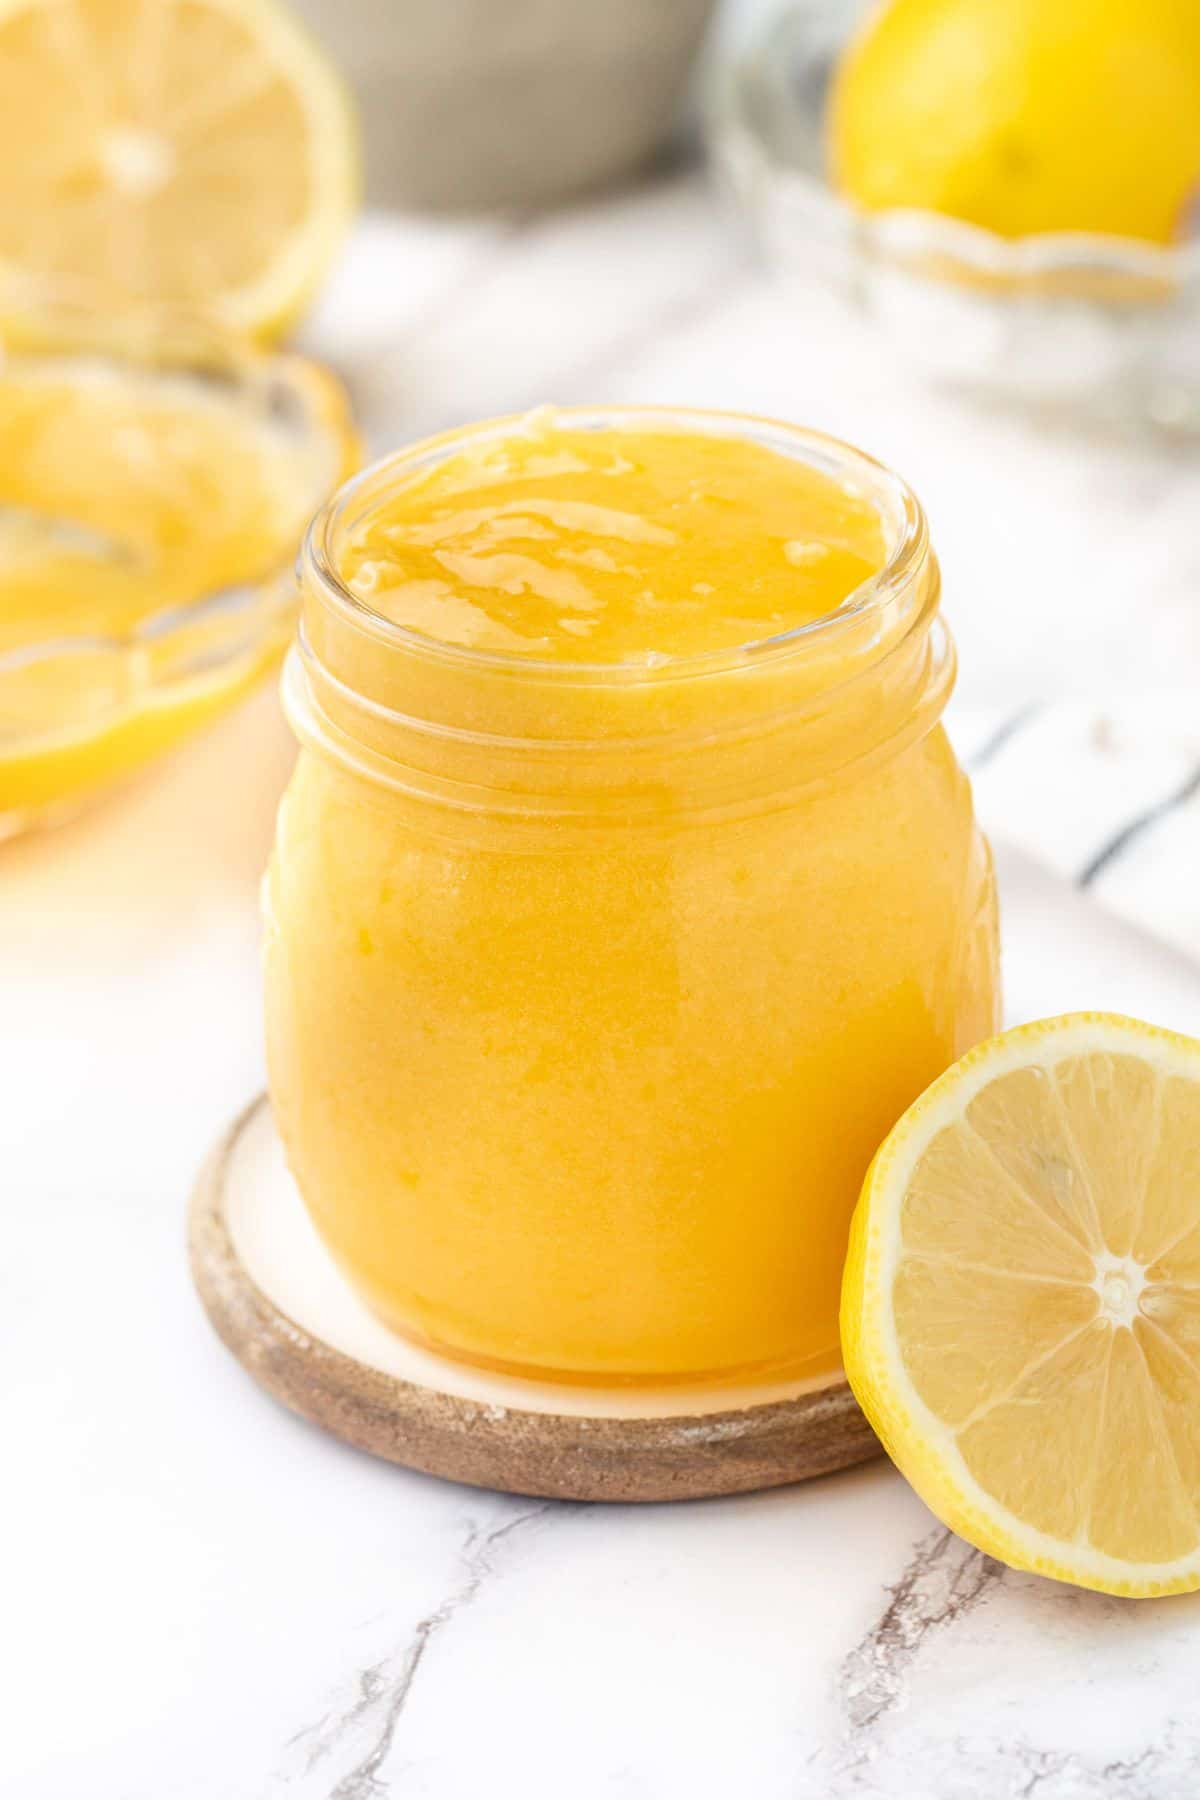 Glass jar of lemon curd, sitting on a small round saucer, with half a lemon on edge.